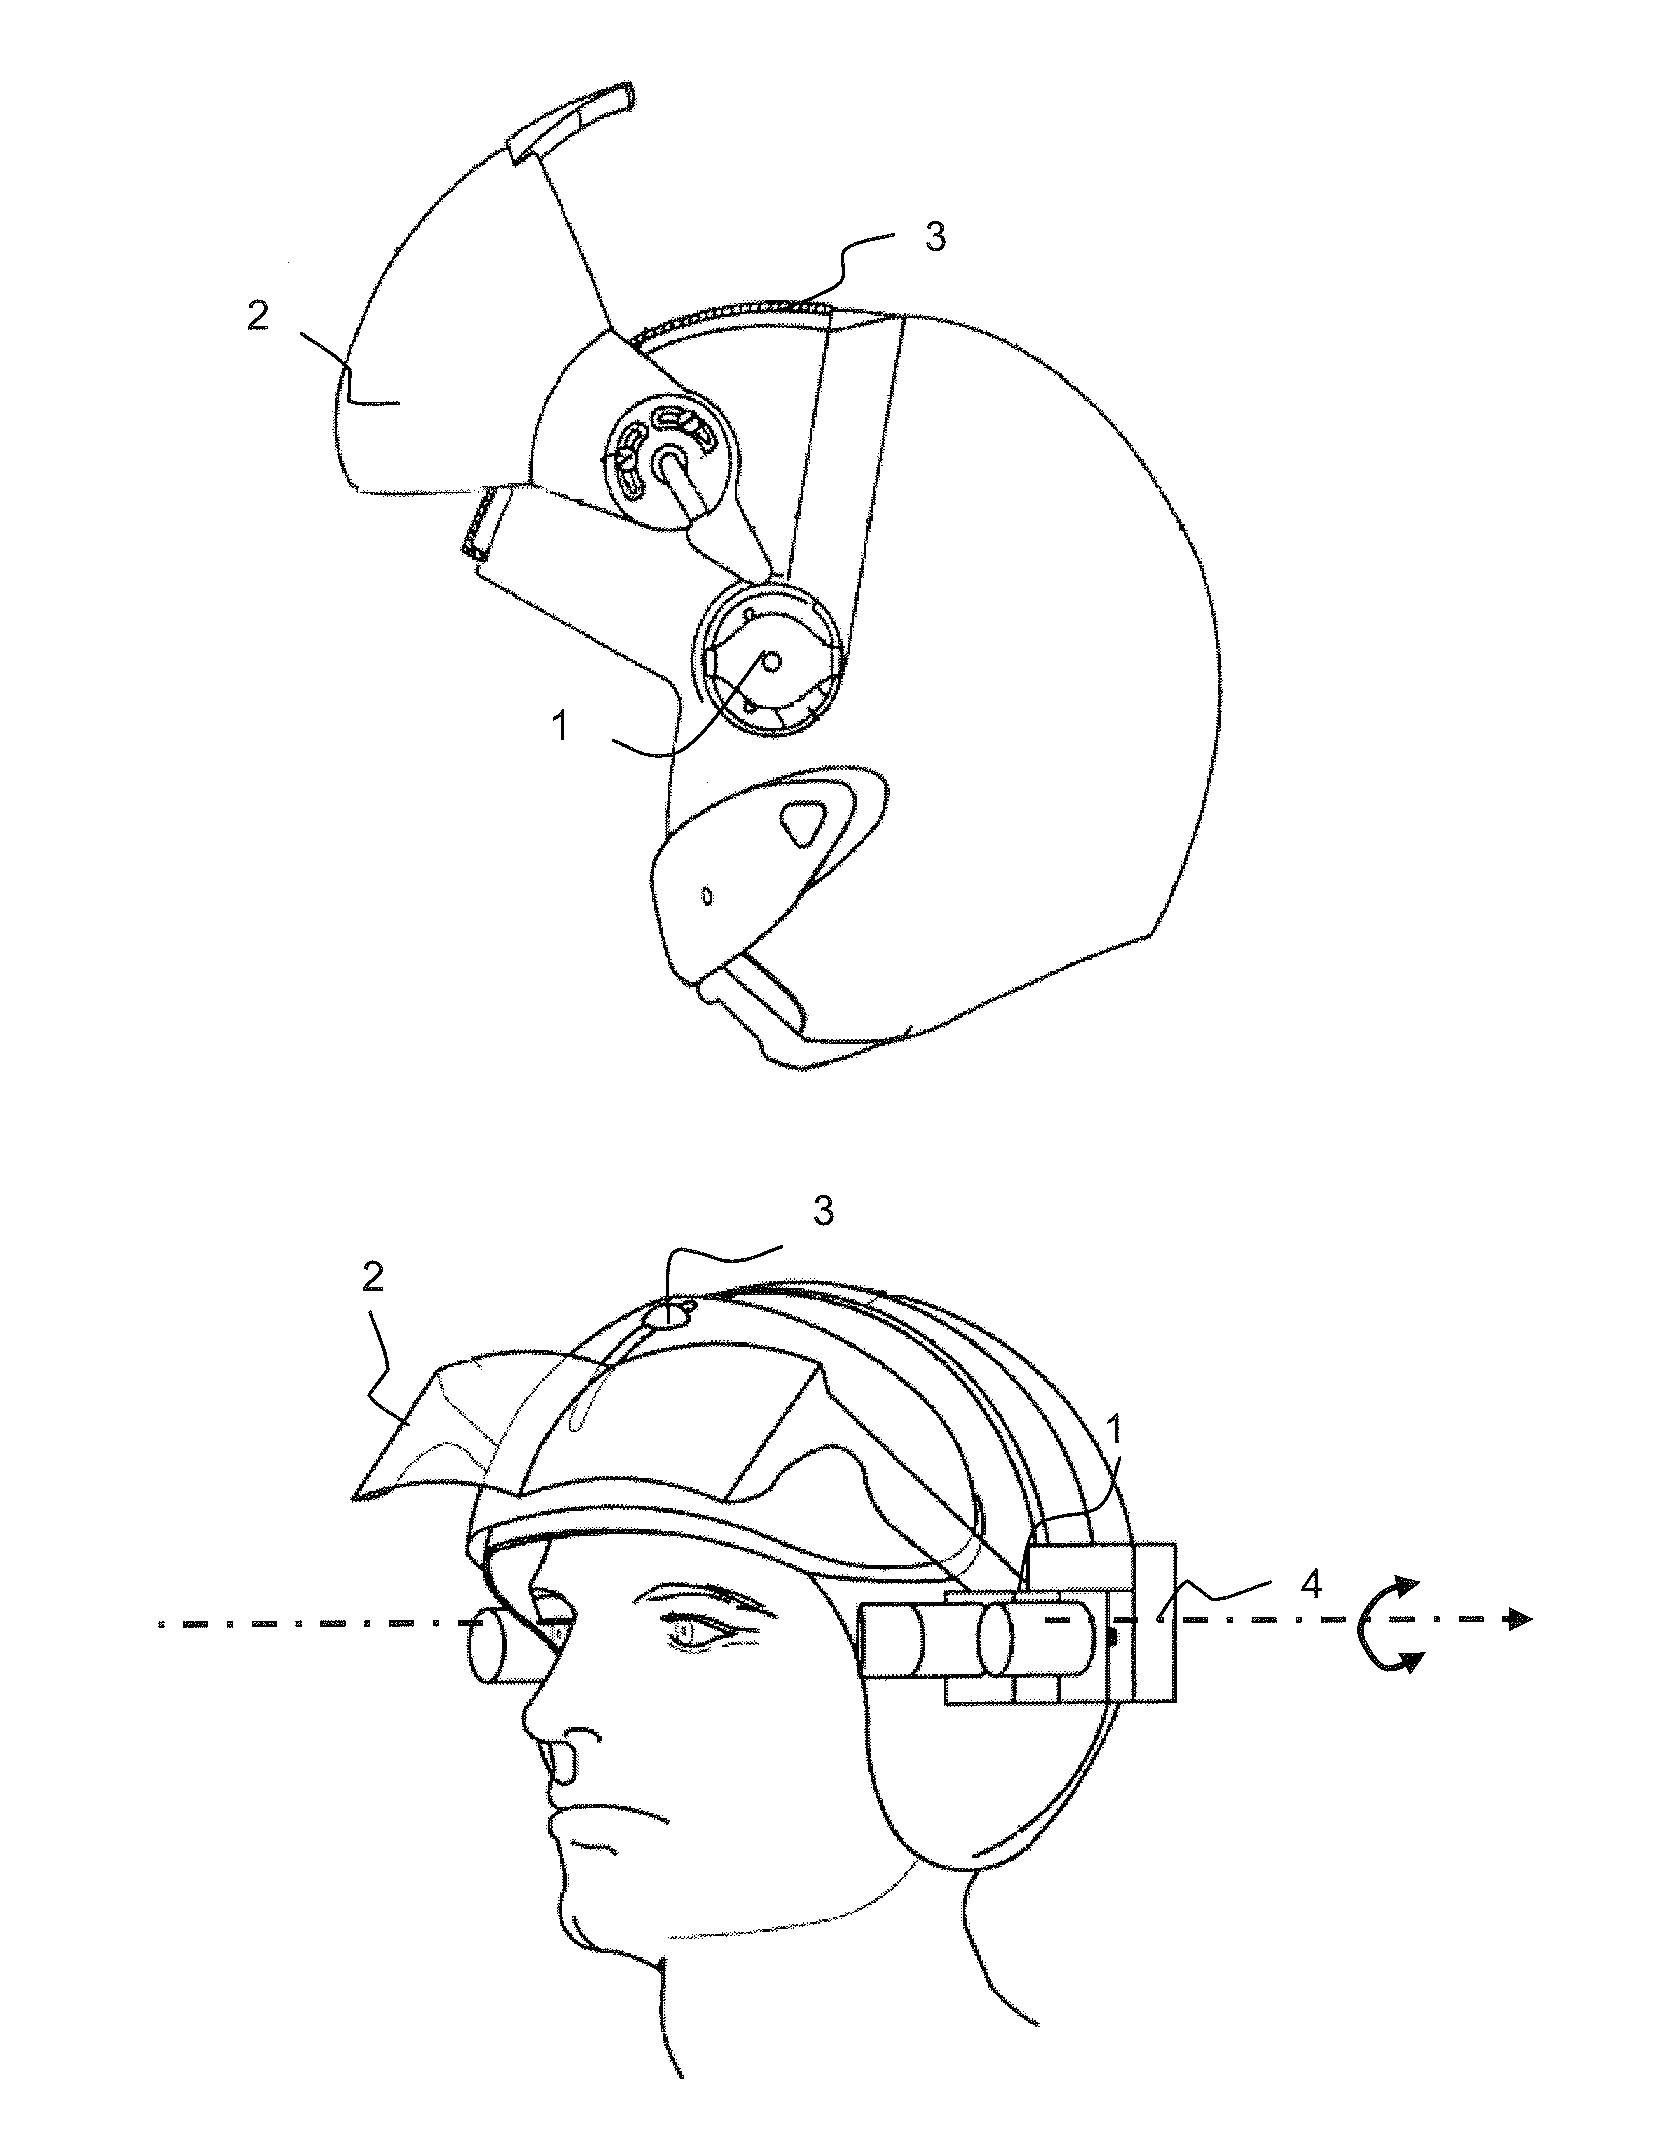 Helmet comprising a movable visor with a vertical axis of rotation